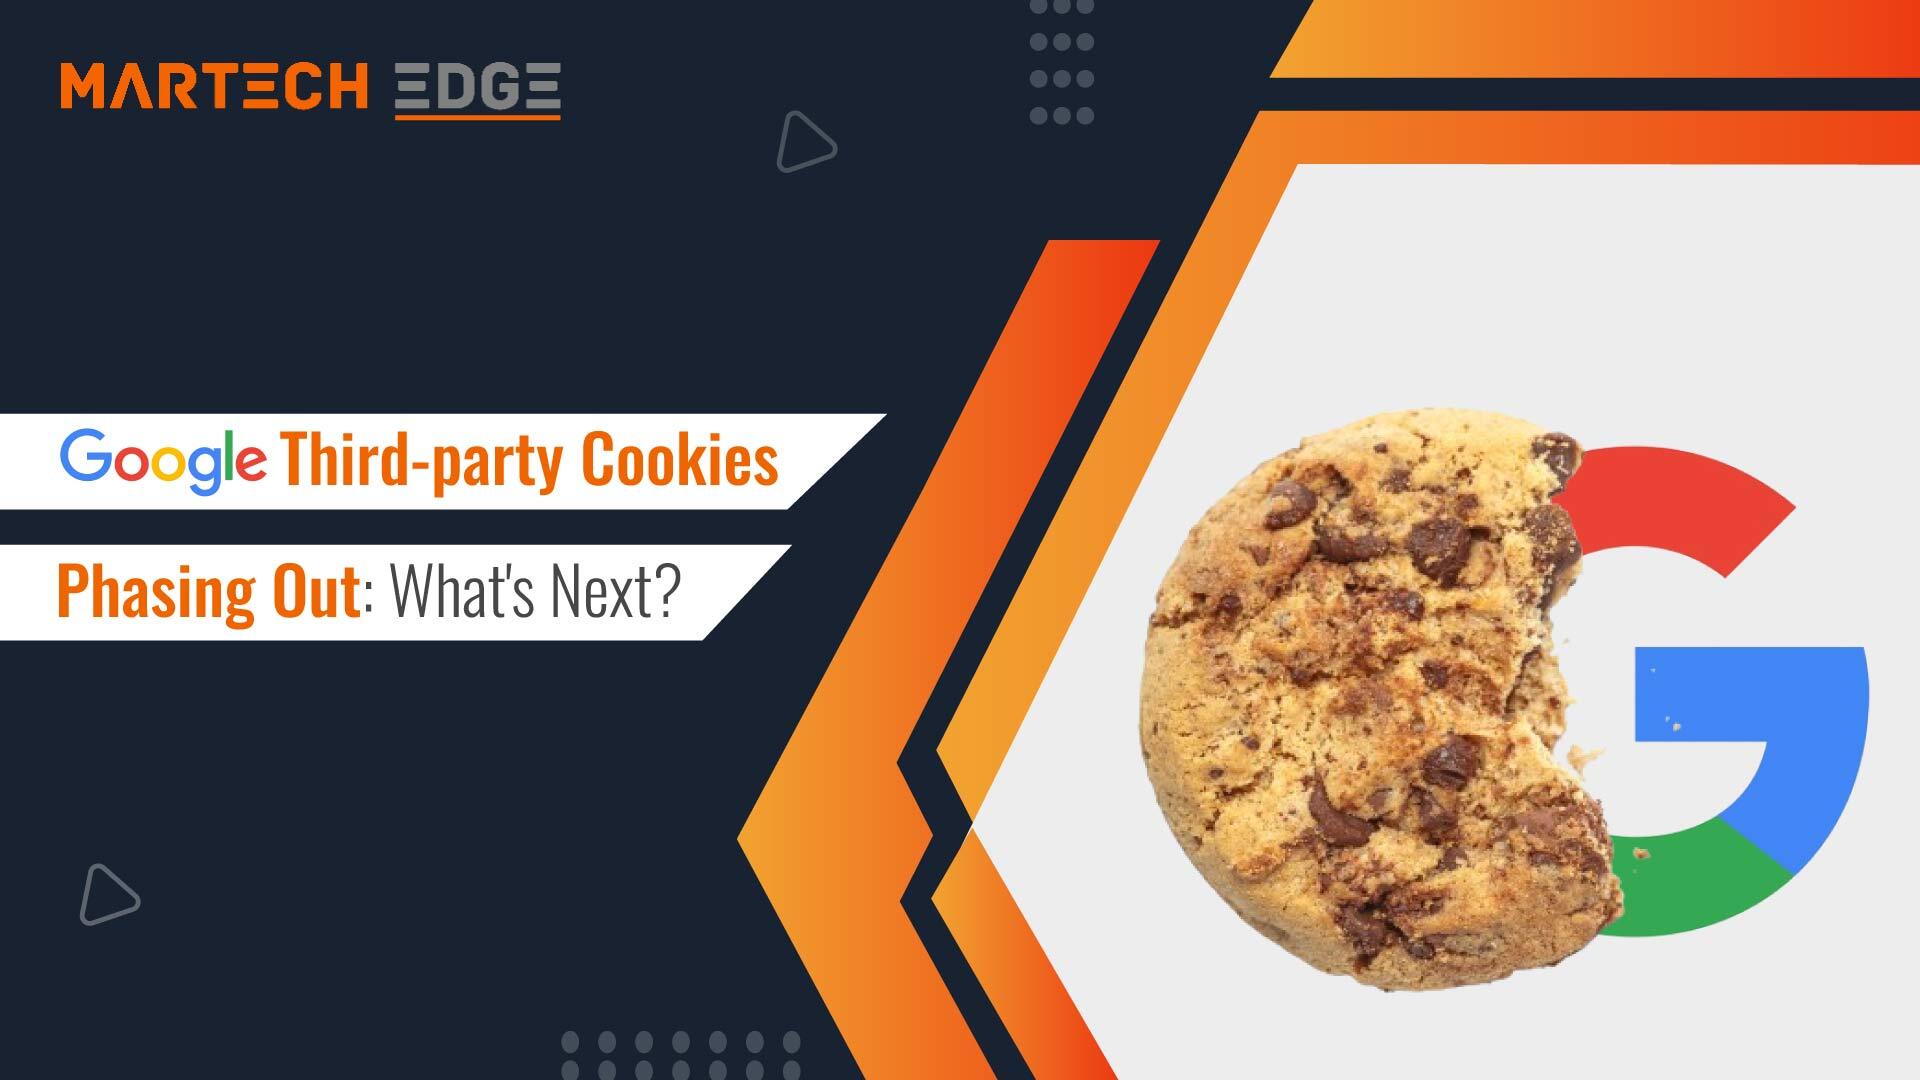 Google Third-party Cookies Phasing Out: What's Next?